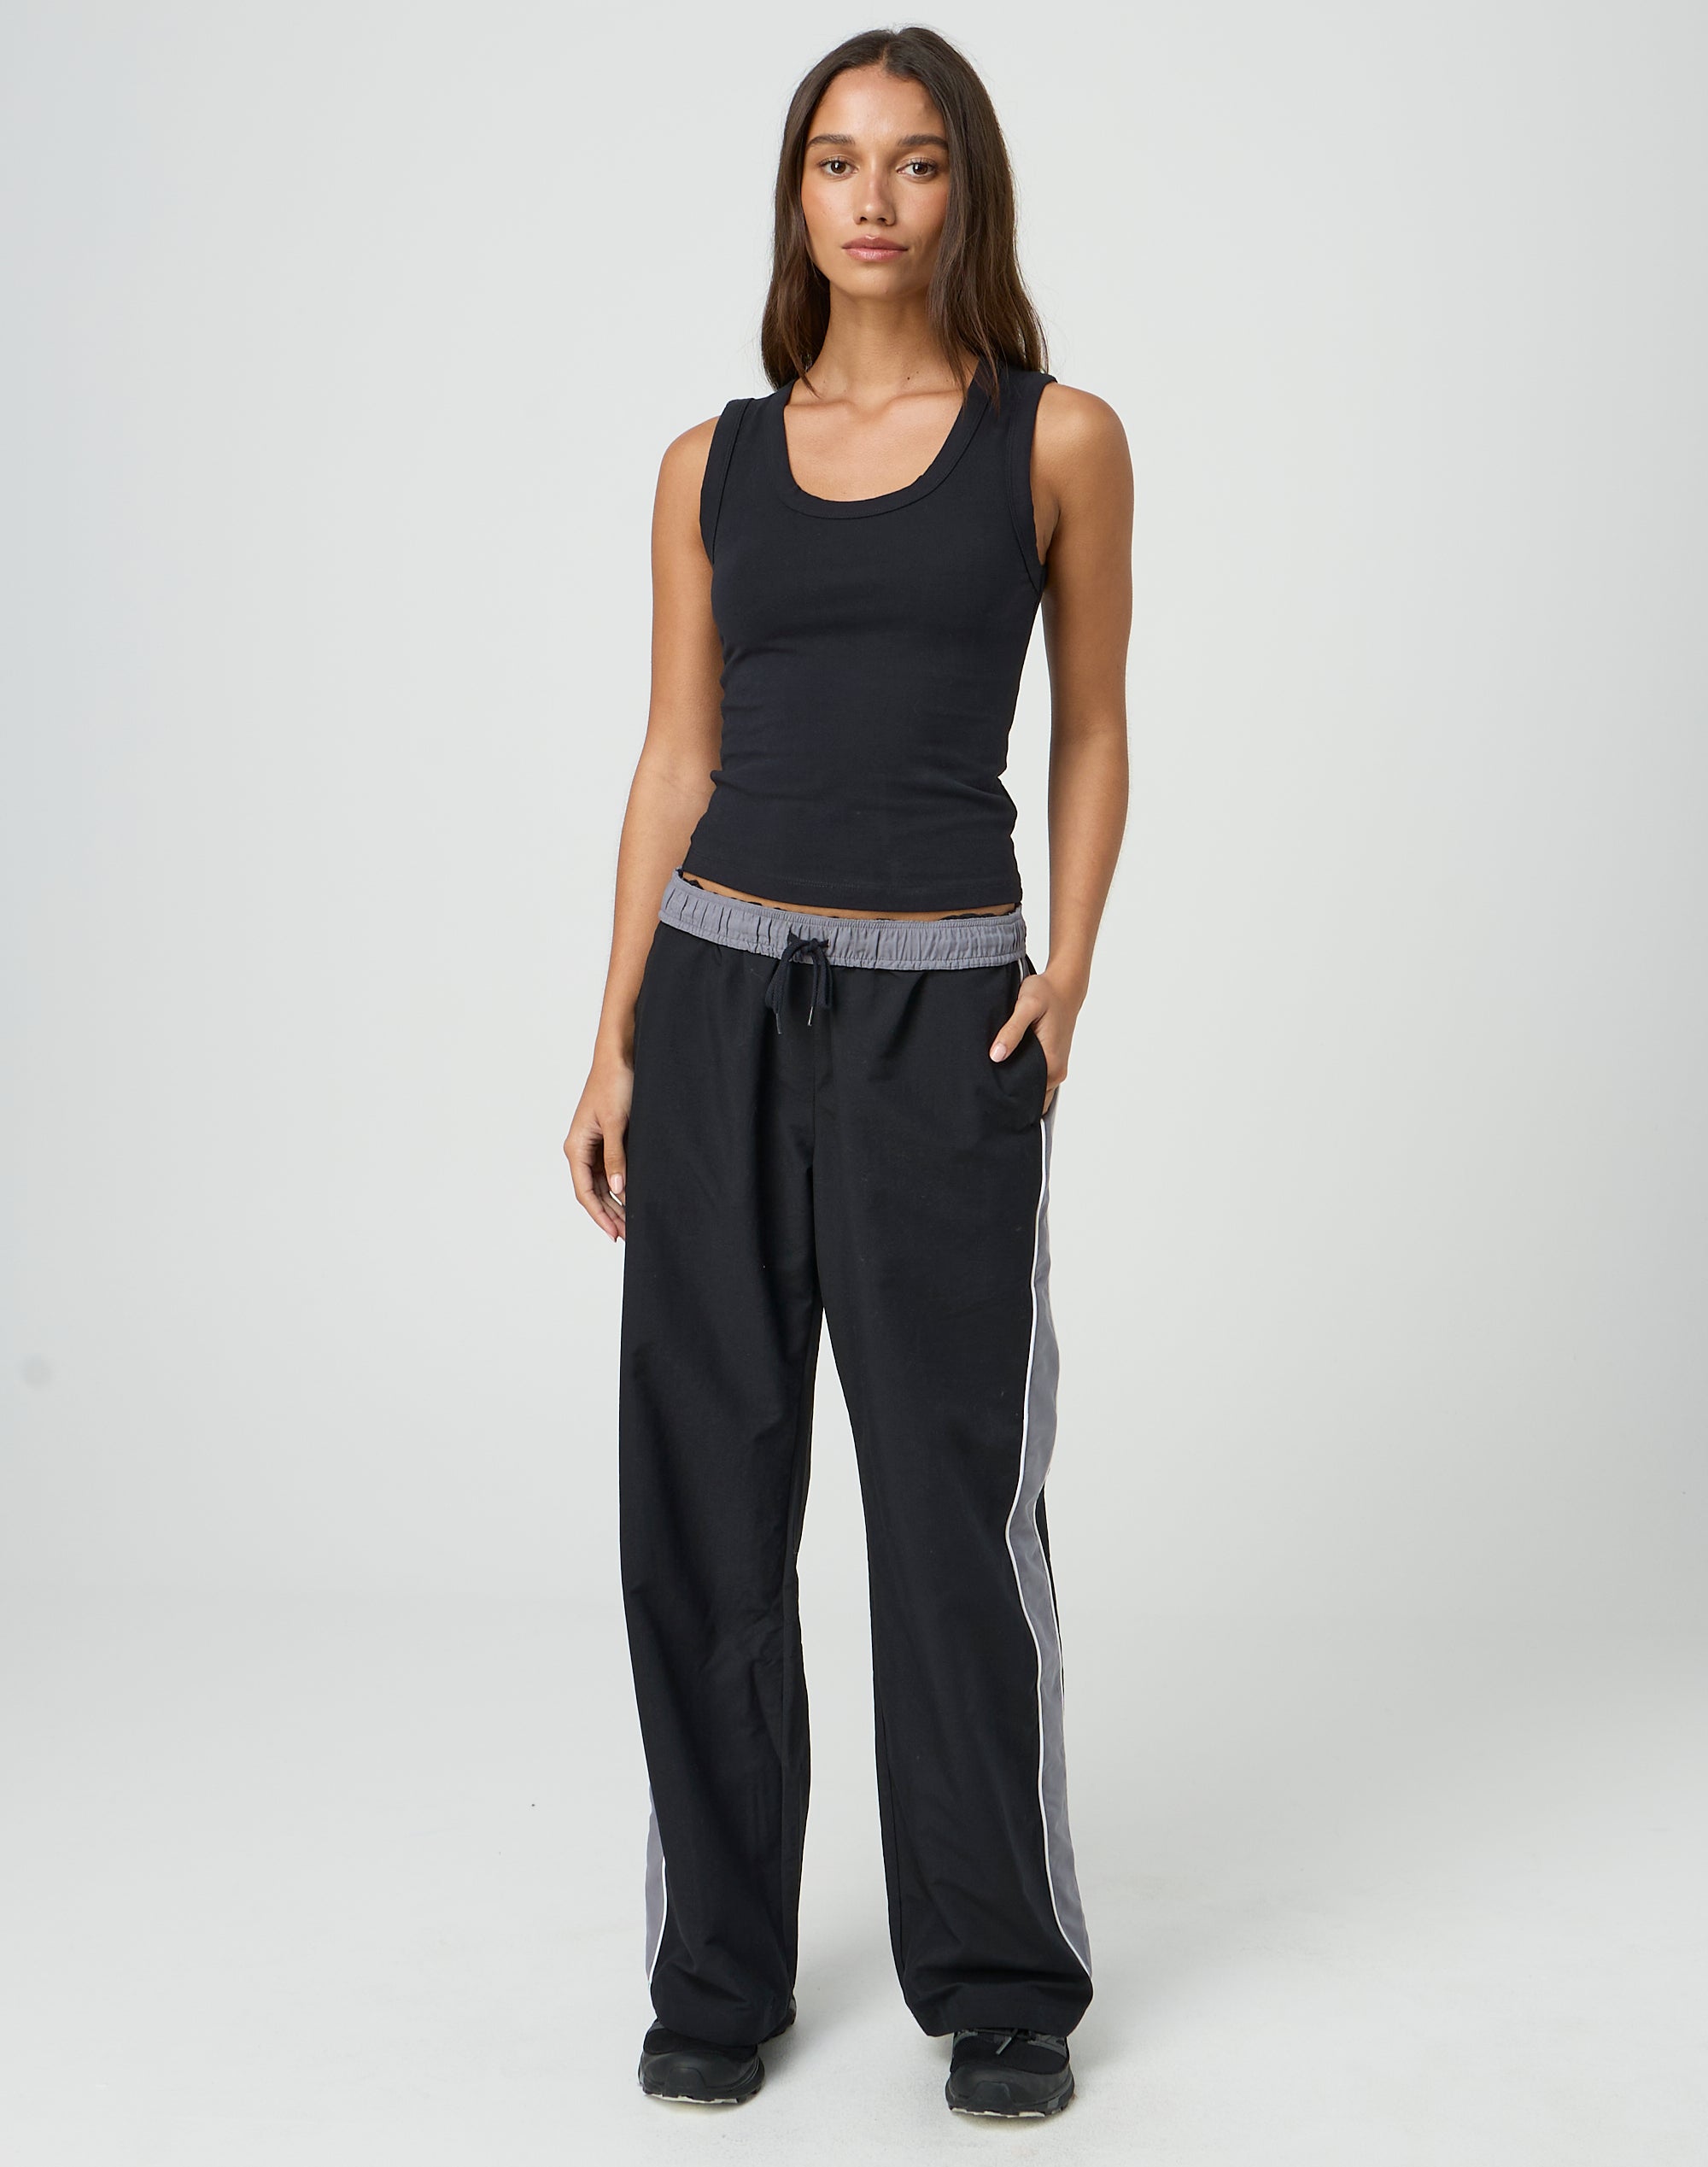 https://www.glassons.com/content/products/lolie-striped-track-pant-blackcoalwhite-front-pw127507pln.jpg